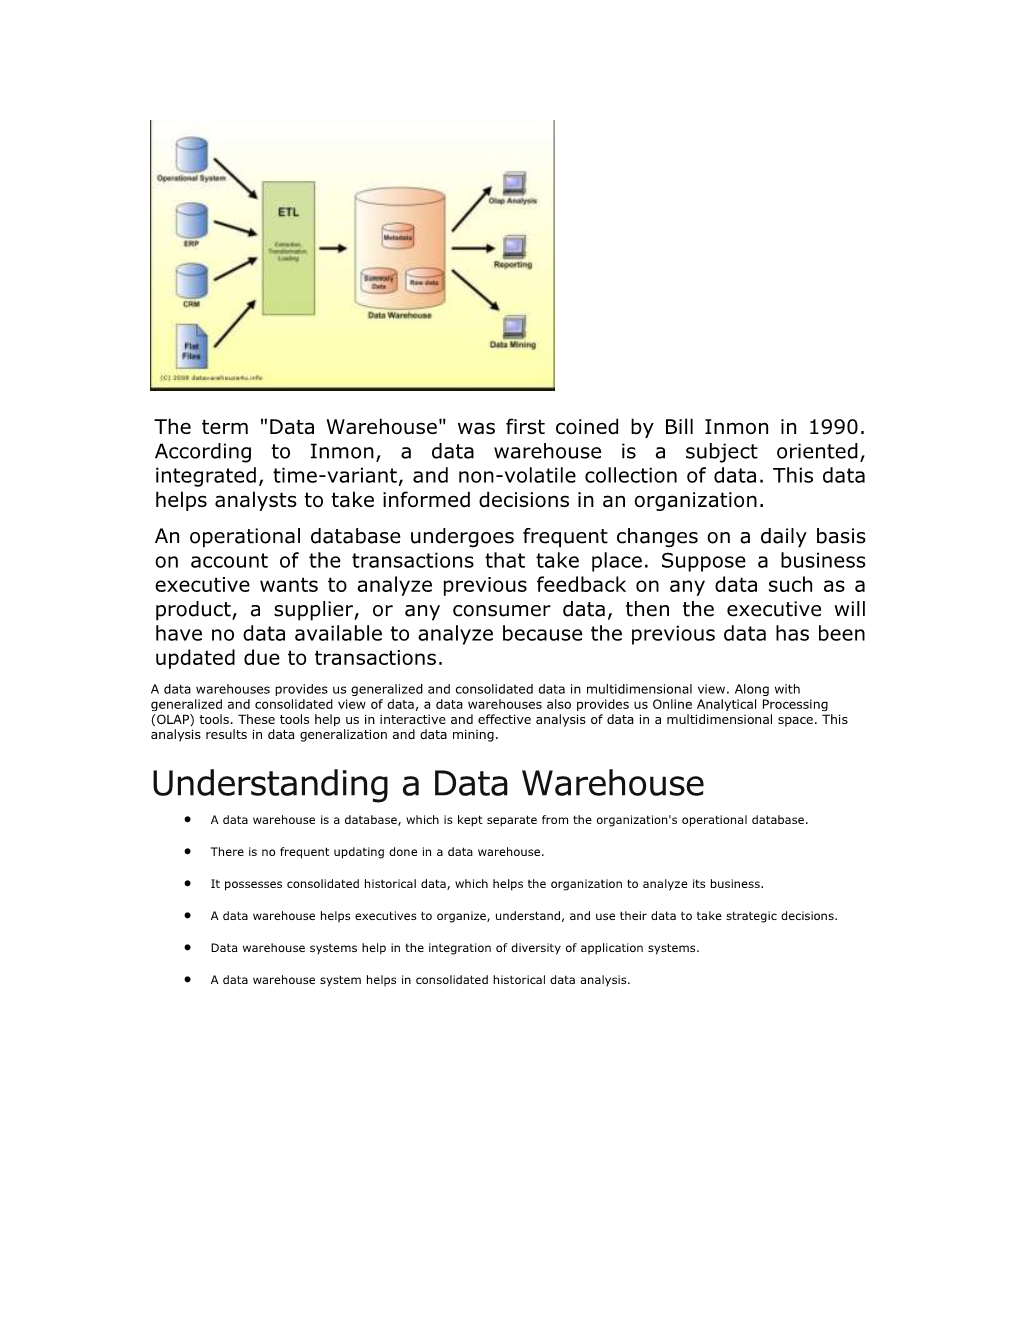 Understanding a Data Warehouse  a Data Warehouse Is a Database, Which Is Kept Separate from the Organization's Operational Database